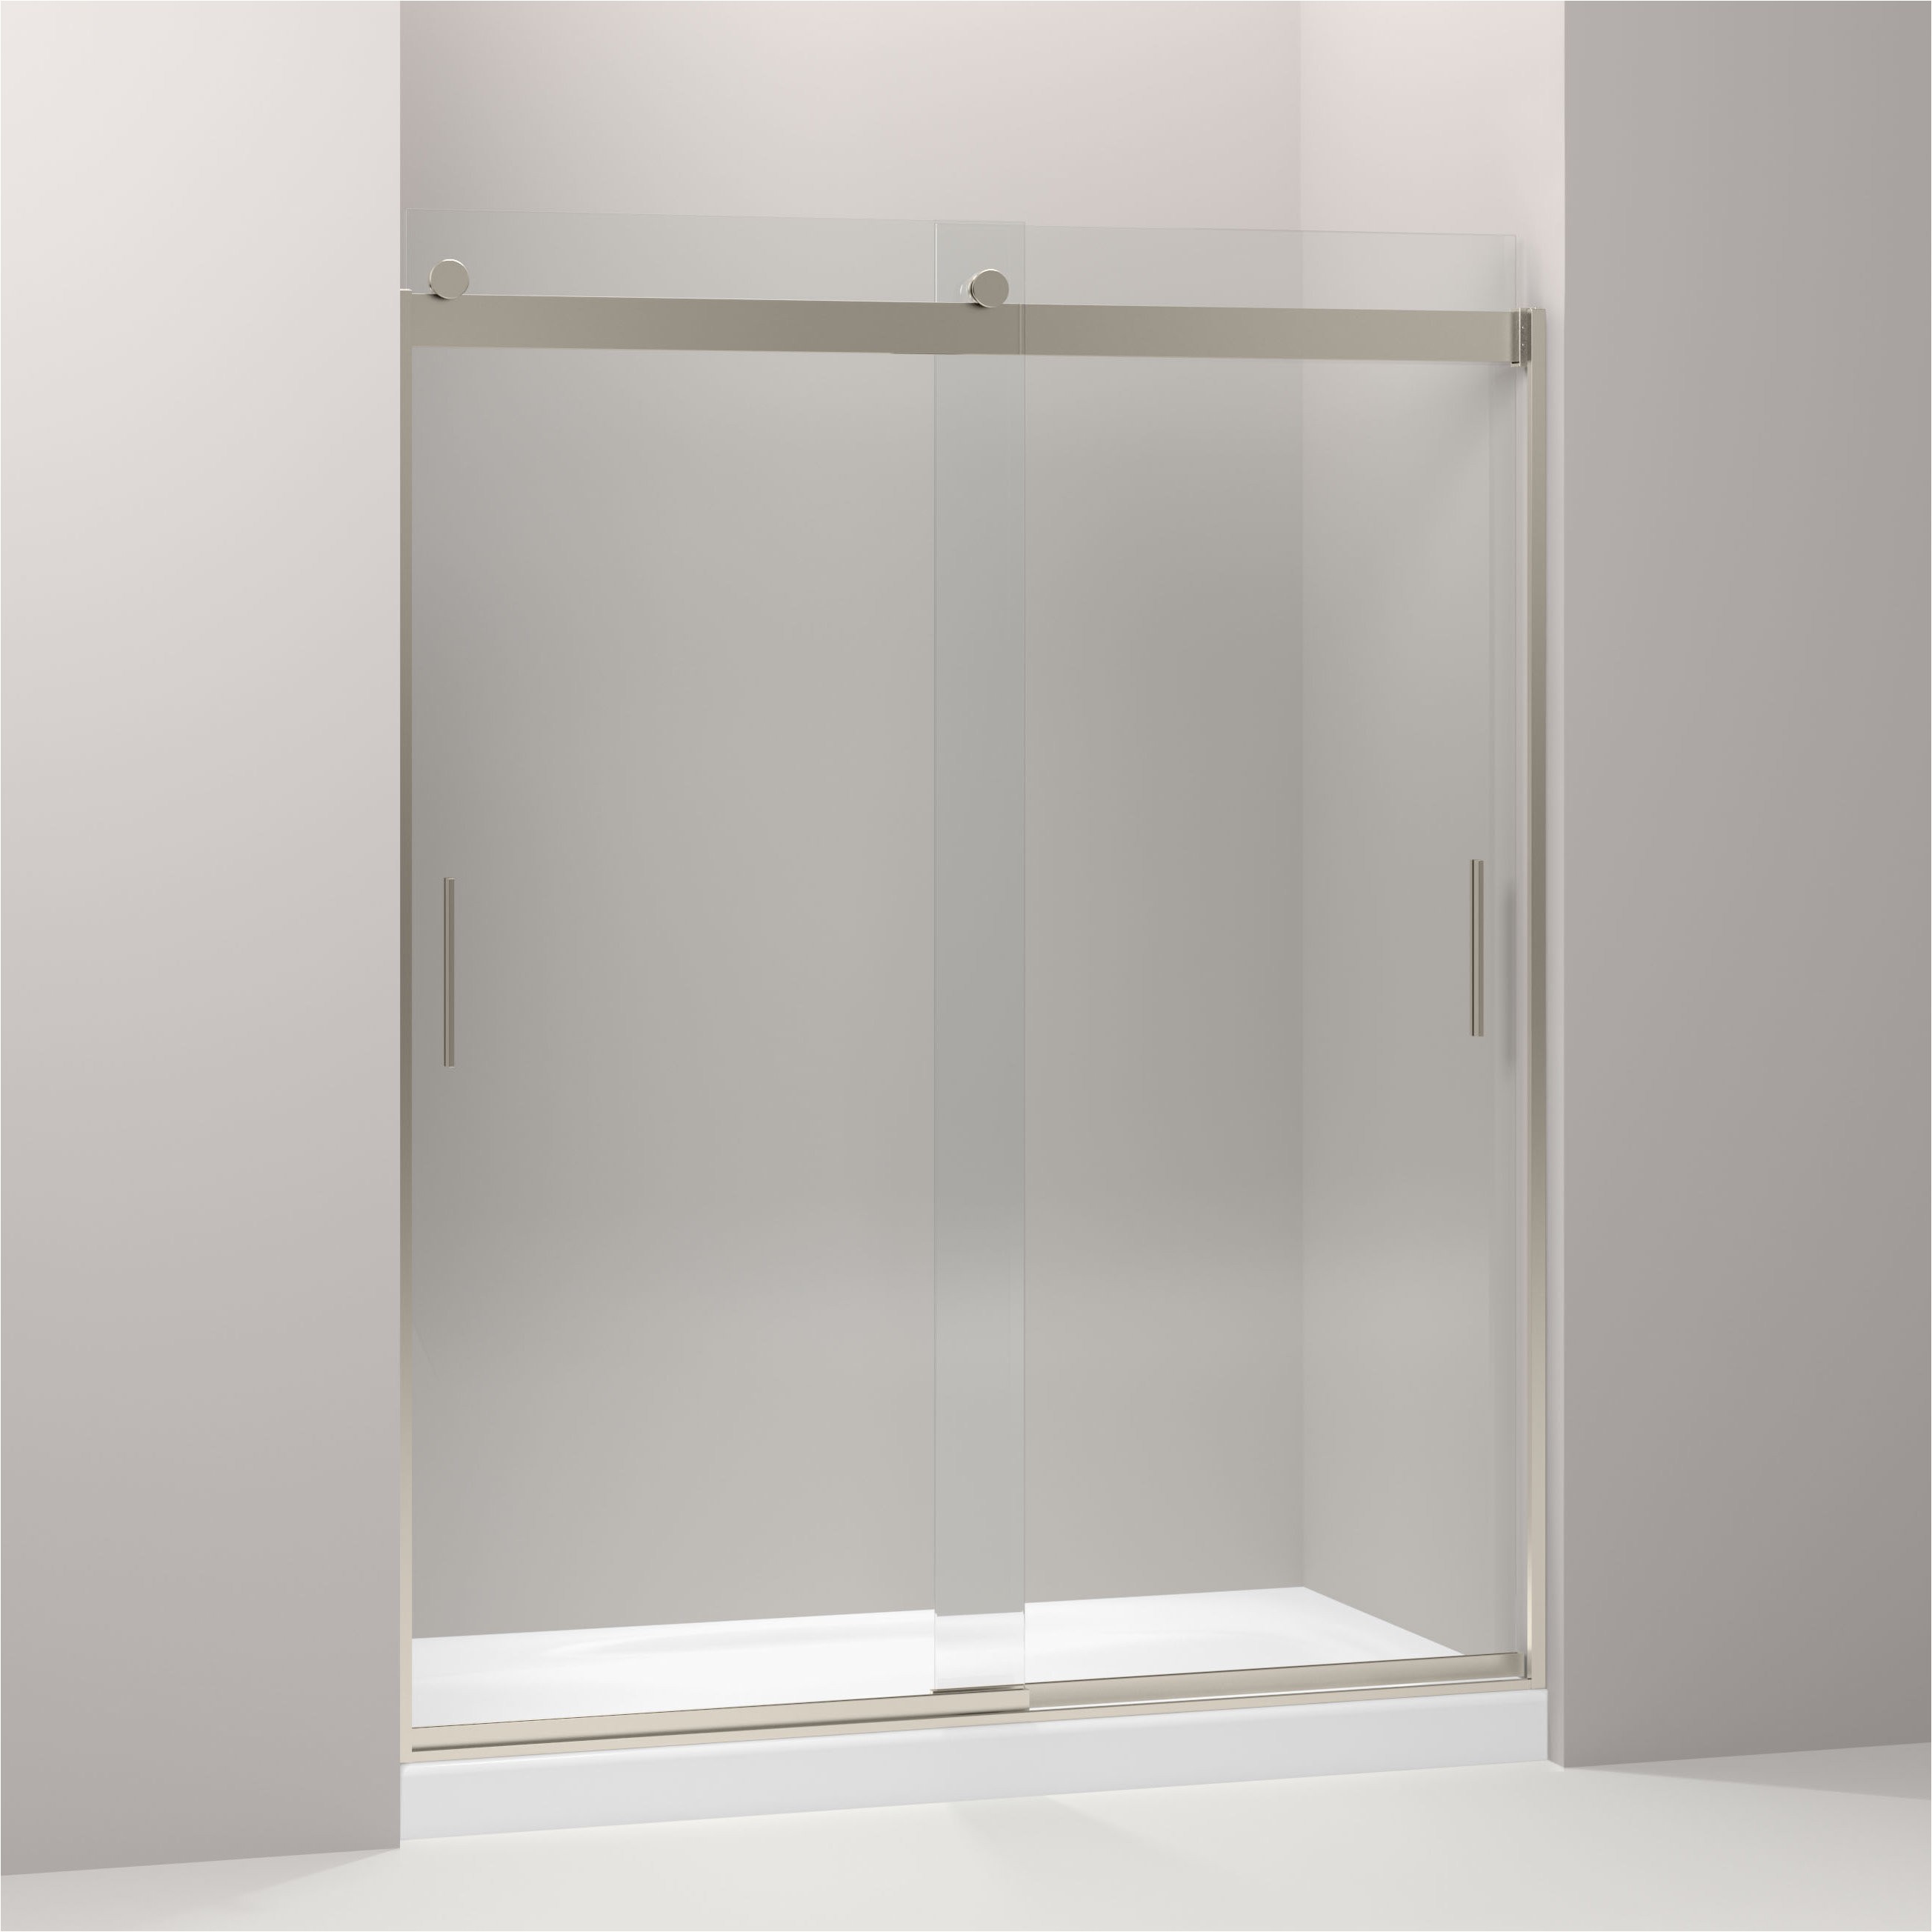 k 706013 l abv nx shp kohler levity 59 63 x 82 double sliding shower door with blade handles with cleancoata technology wayfair